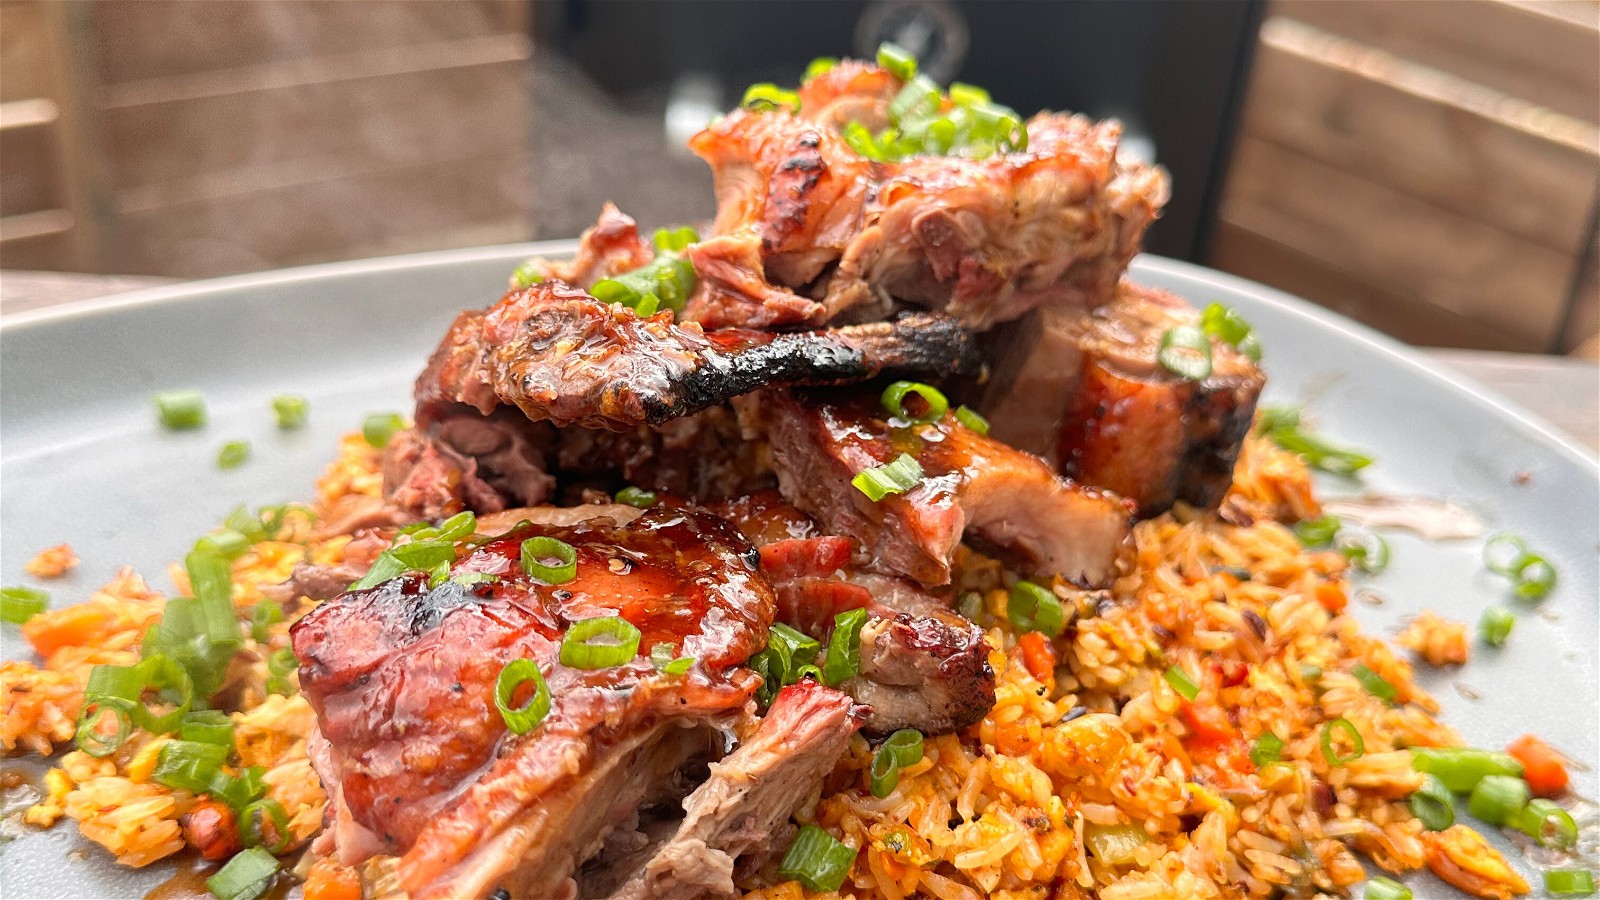 Image of Whole BBQ Duck and Fried Rice 